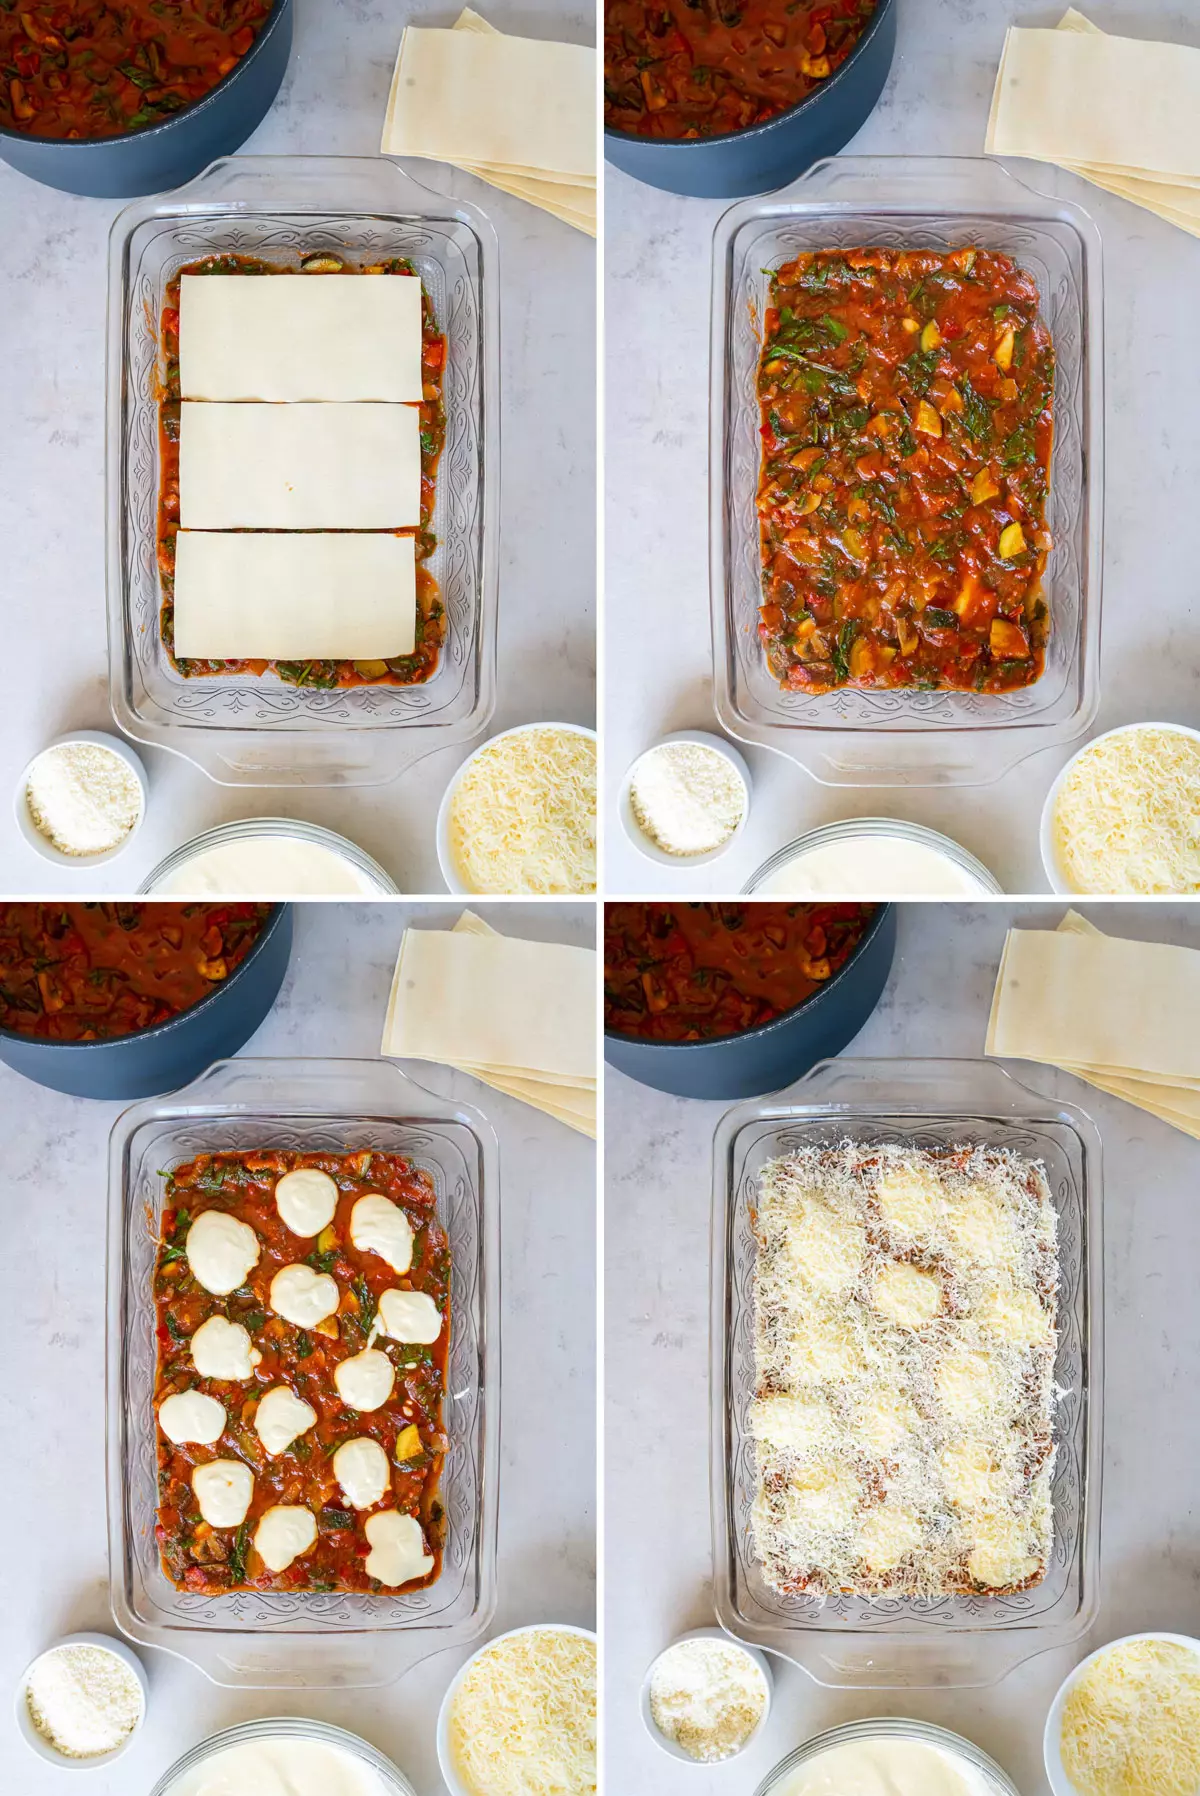 Four images showing how to layer lasagna: noodles, sauce, cheese, repeat.